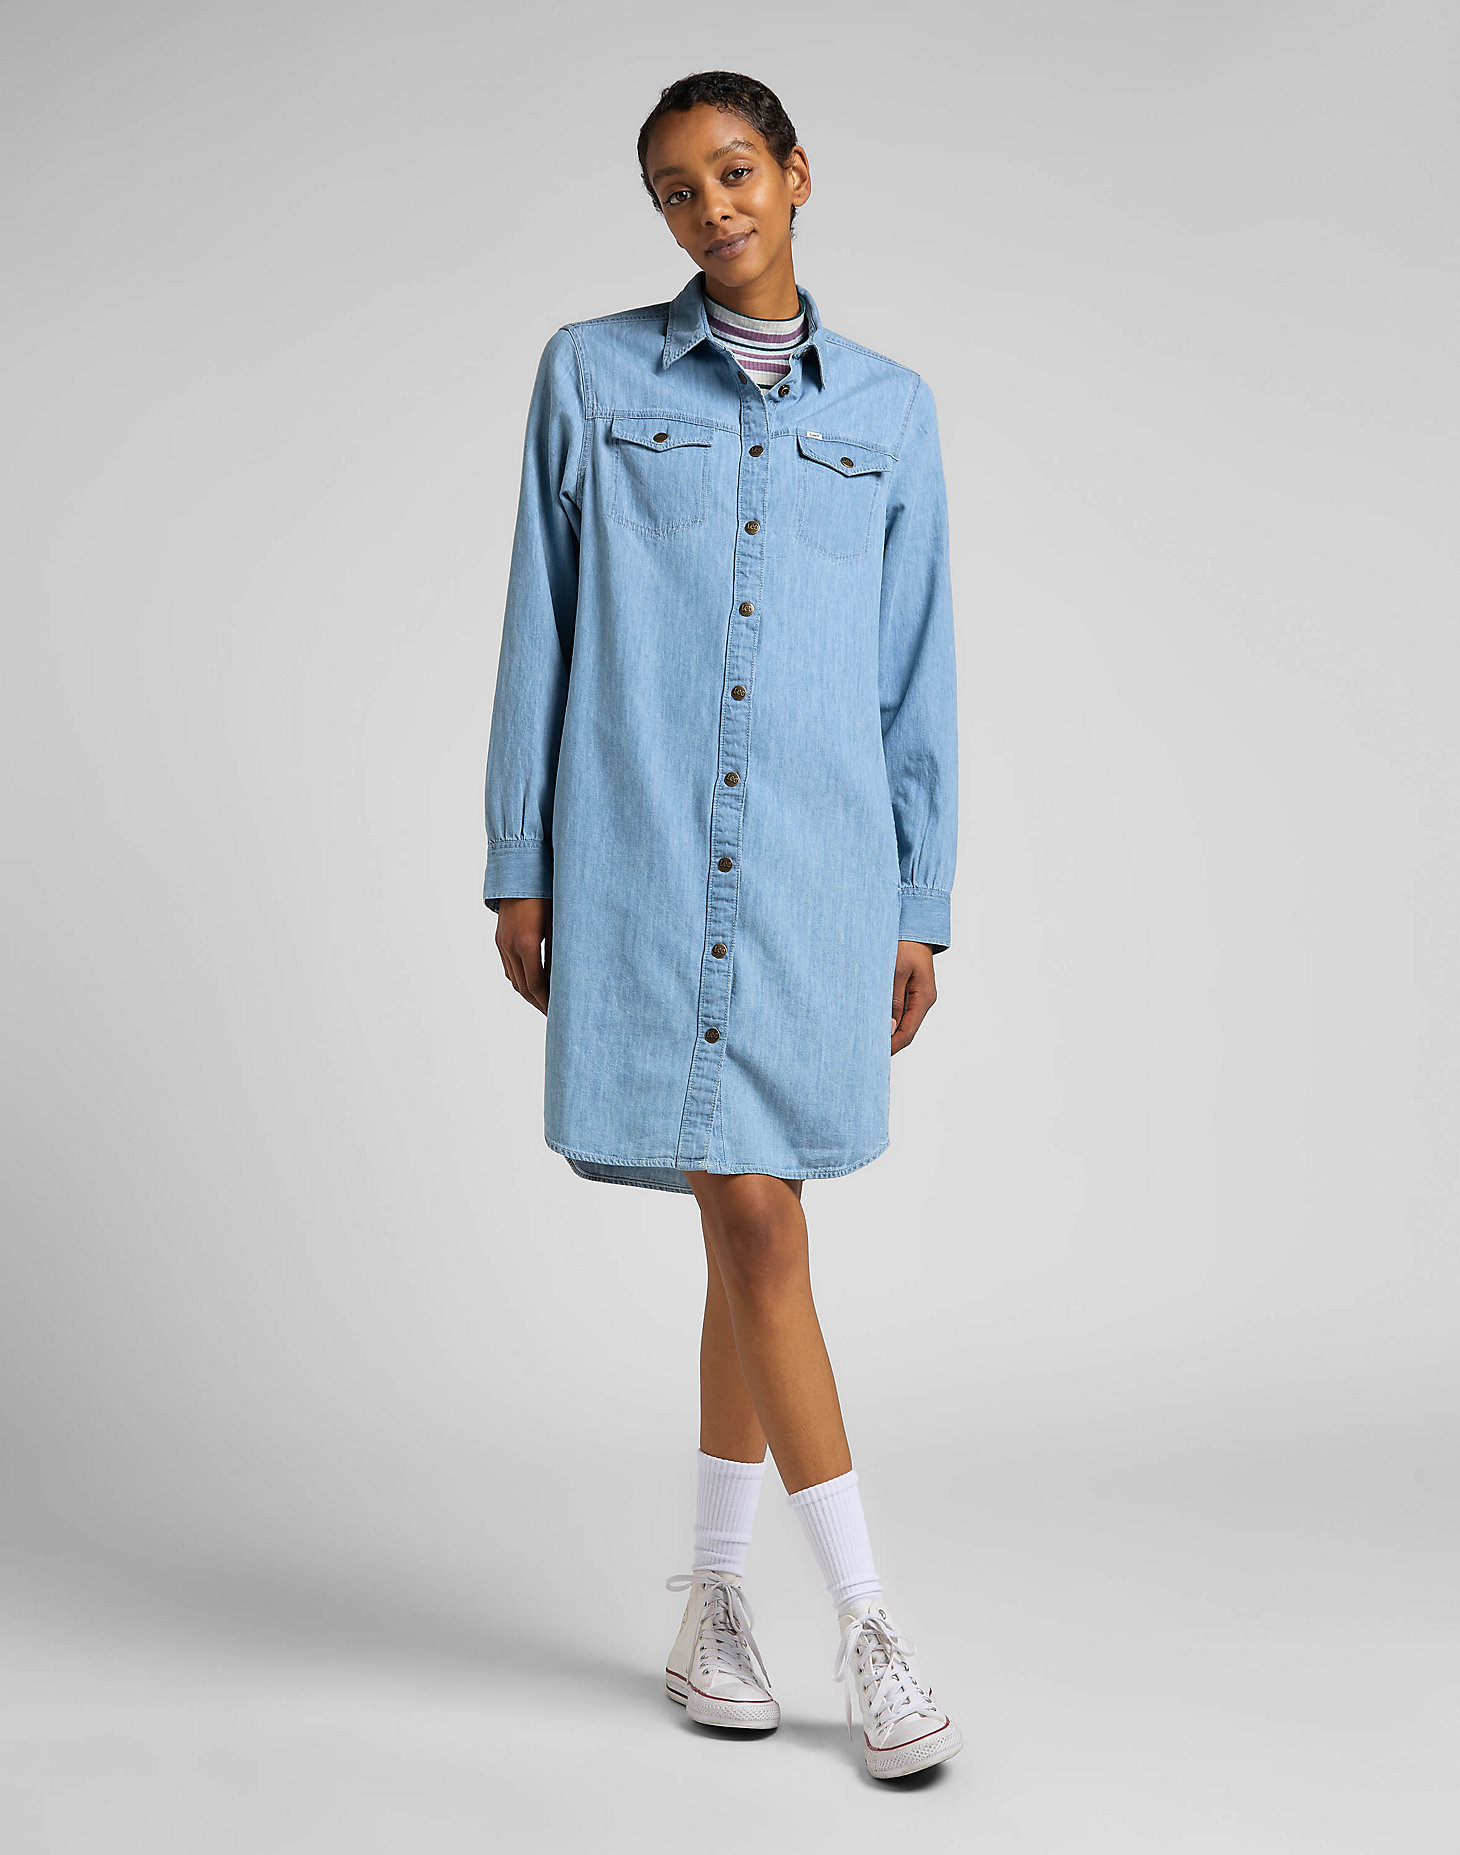 Shirt Dress in Washed Blue alternative view 2